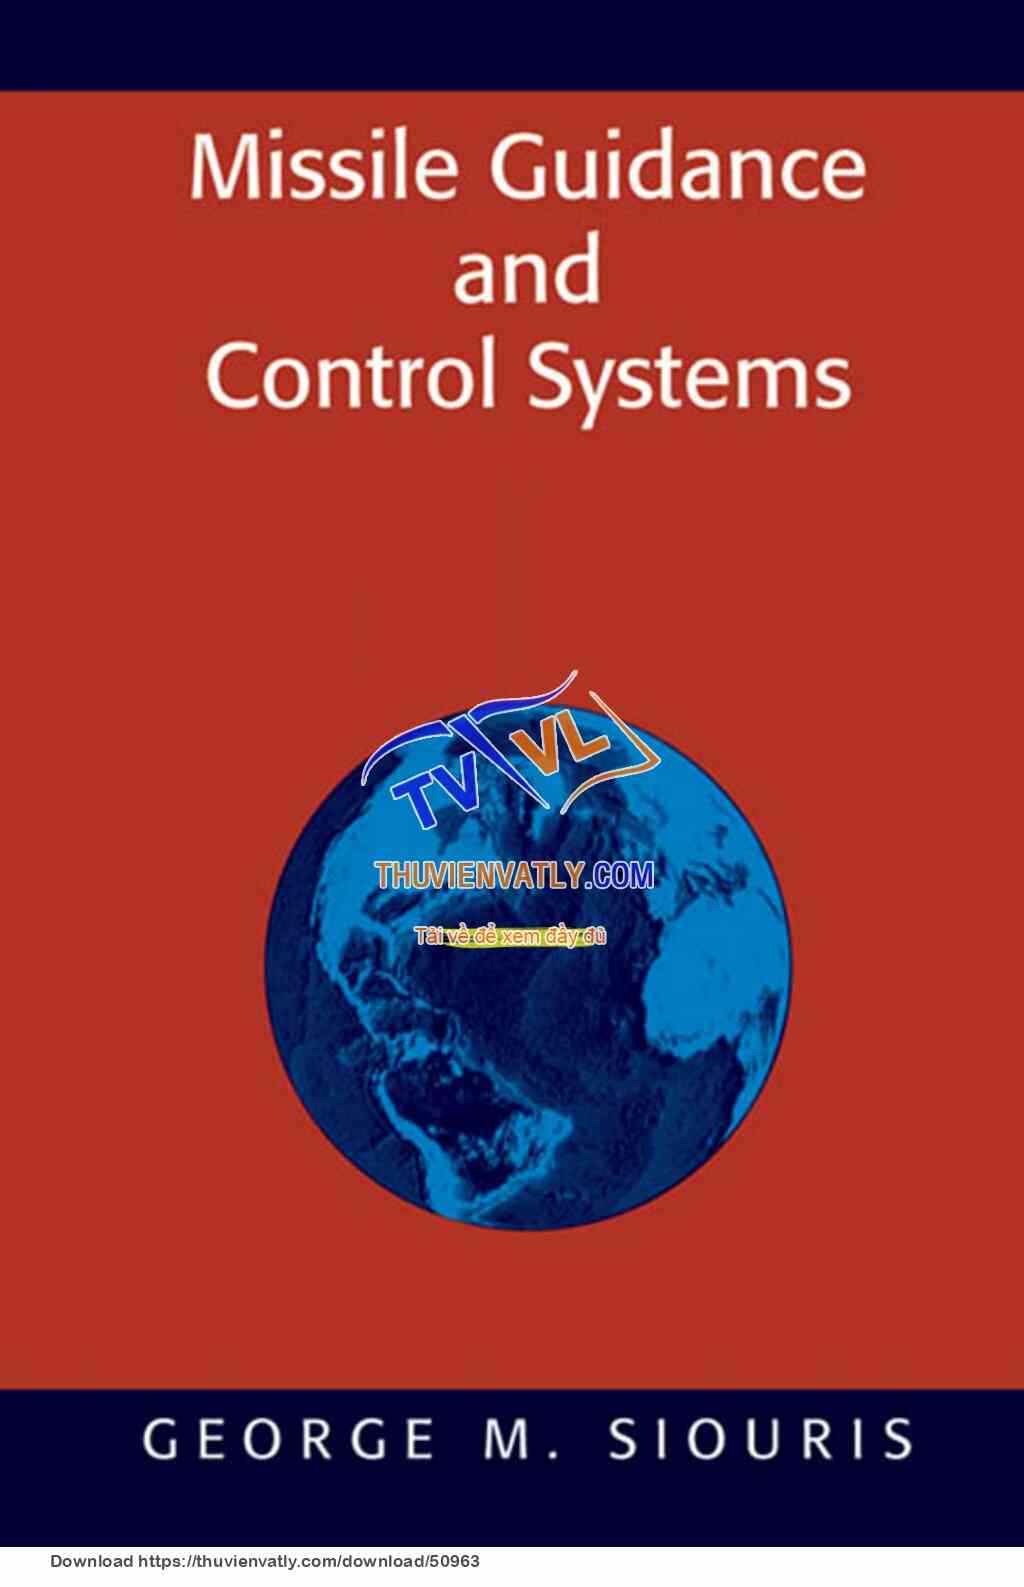 Missile guidance and control system